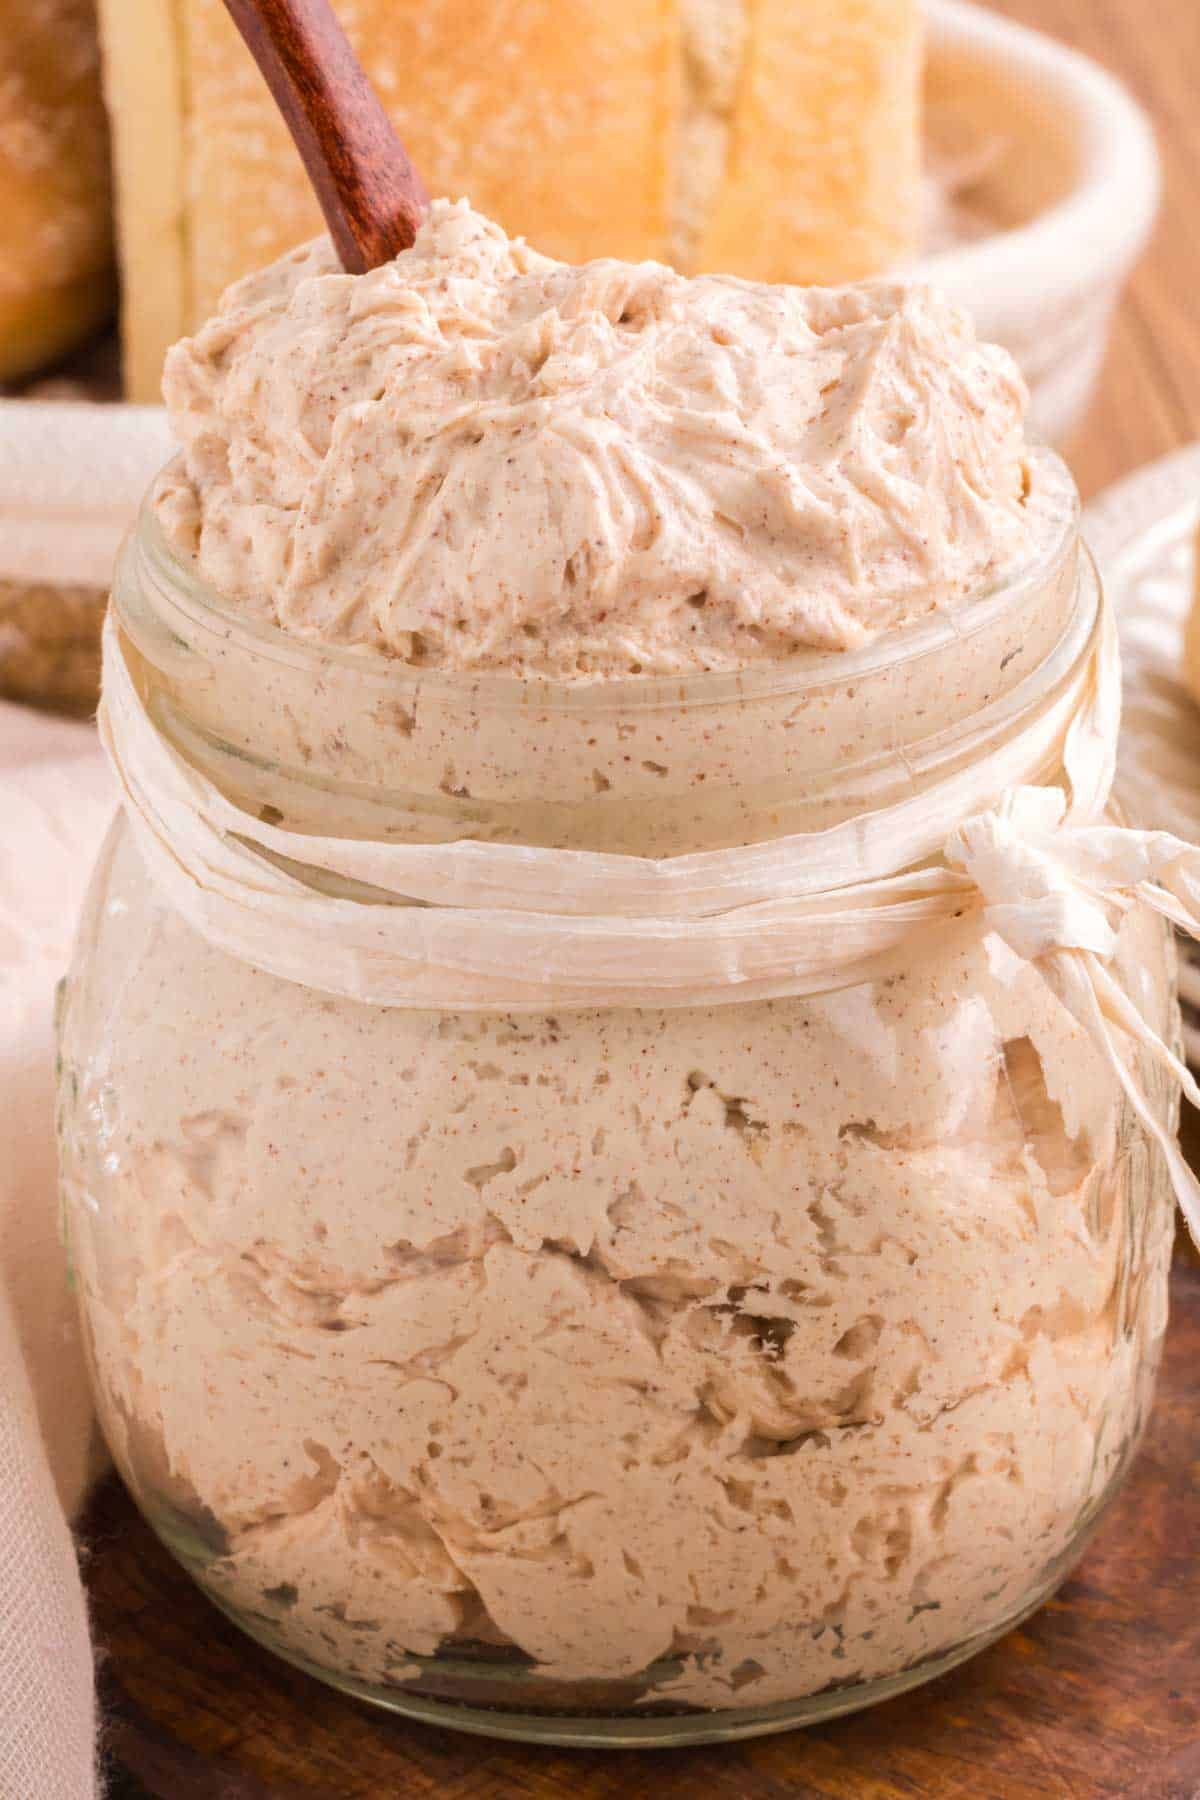 Whipped cinnamon honey butter in a glass jar.